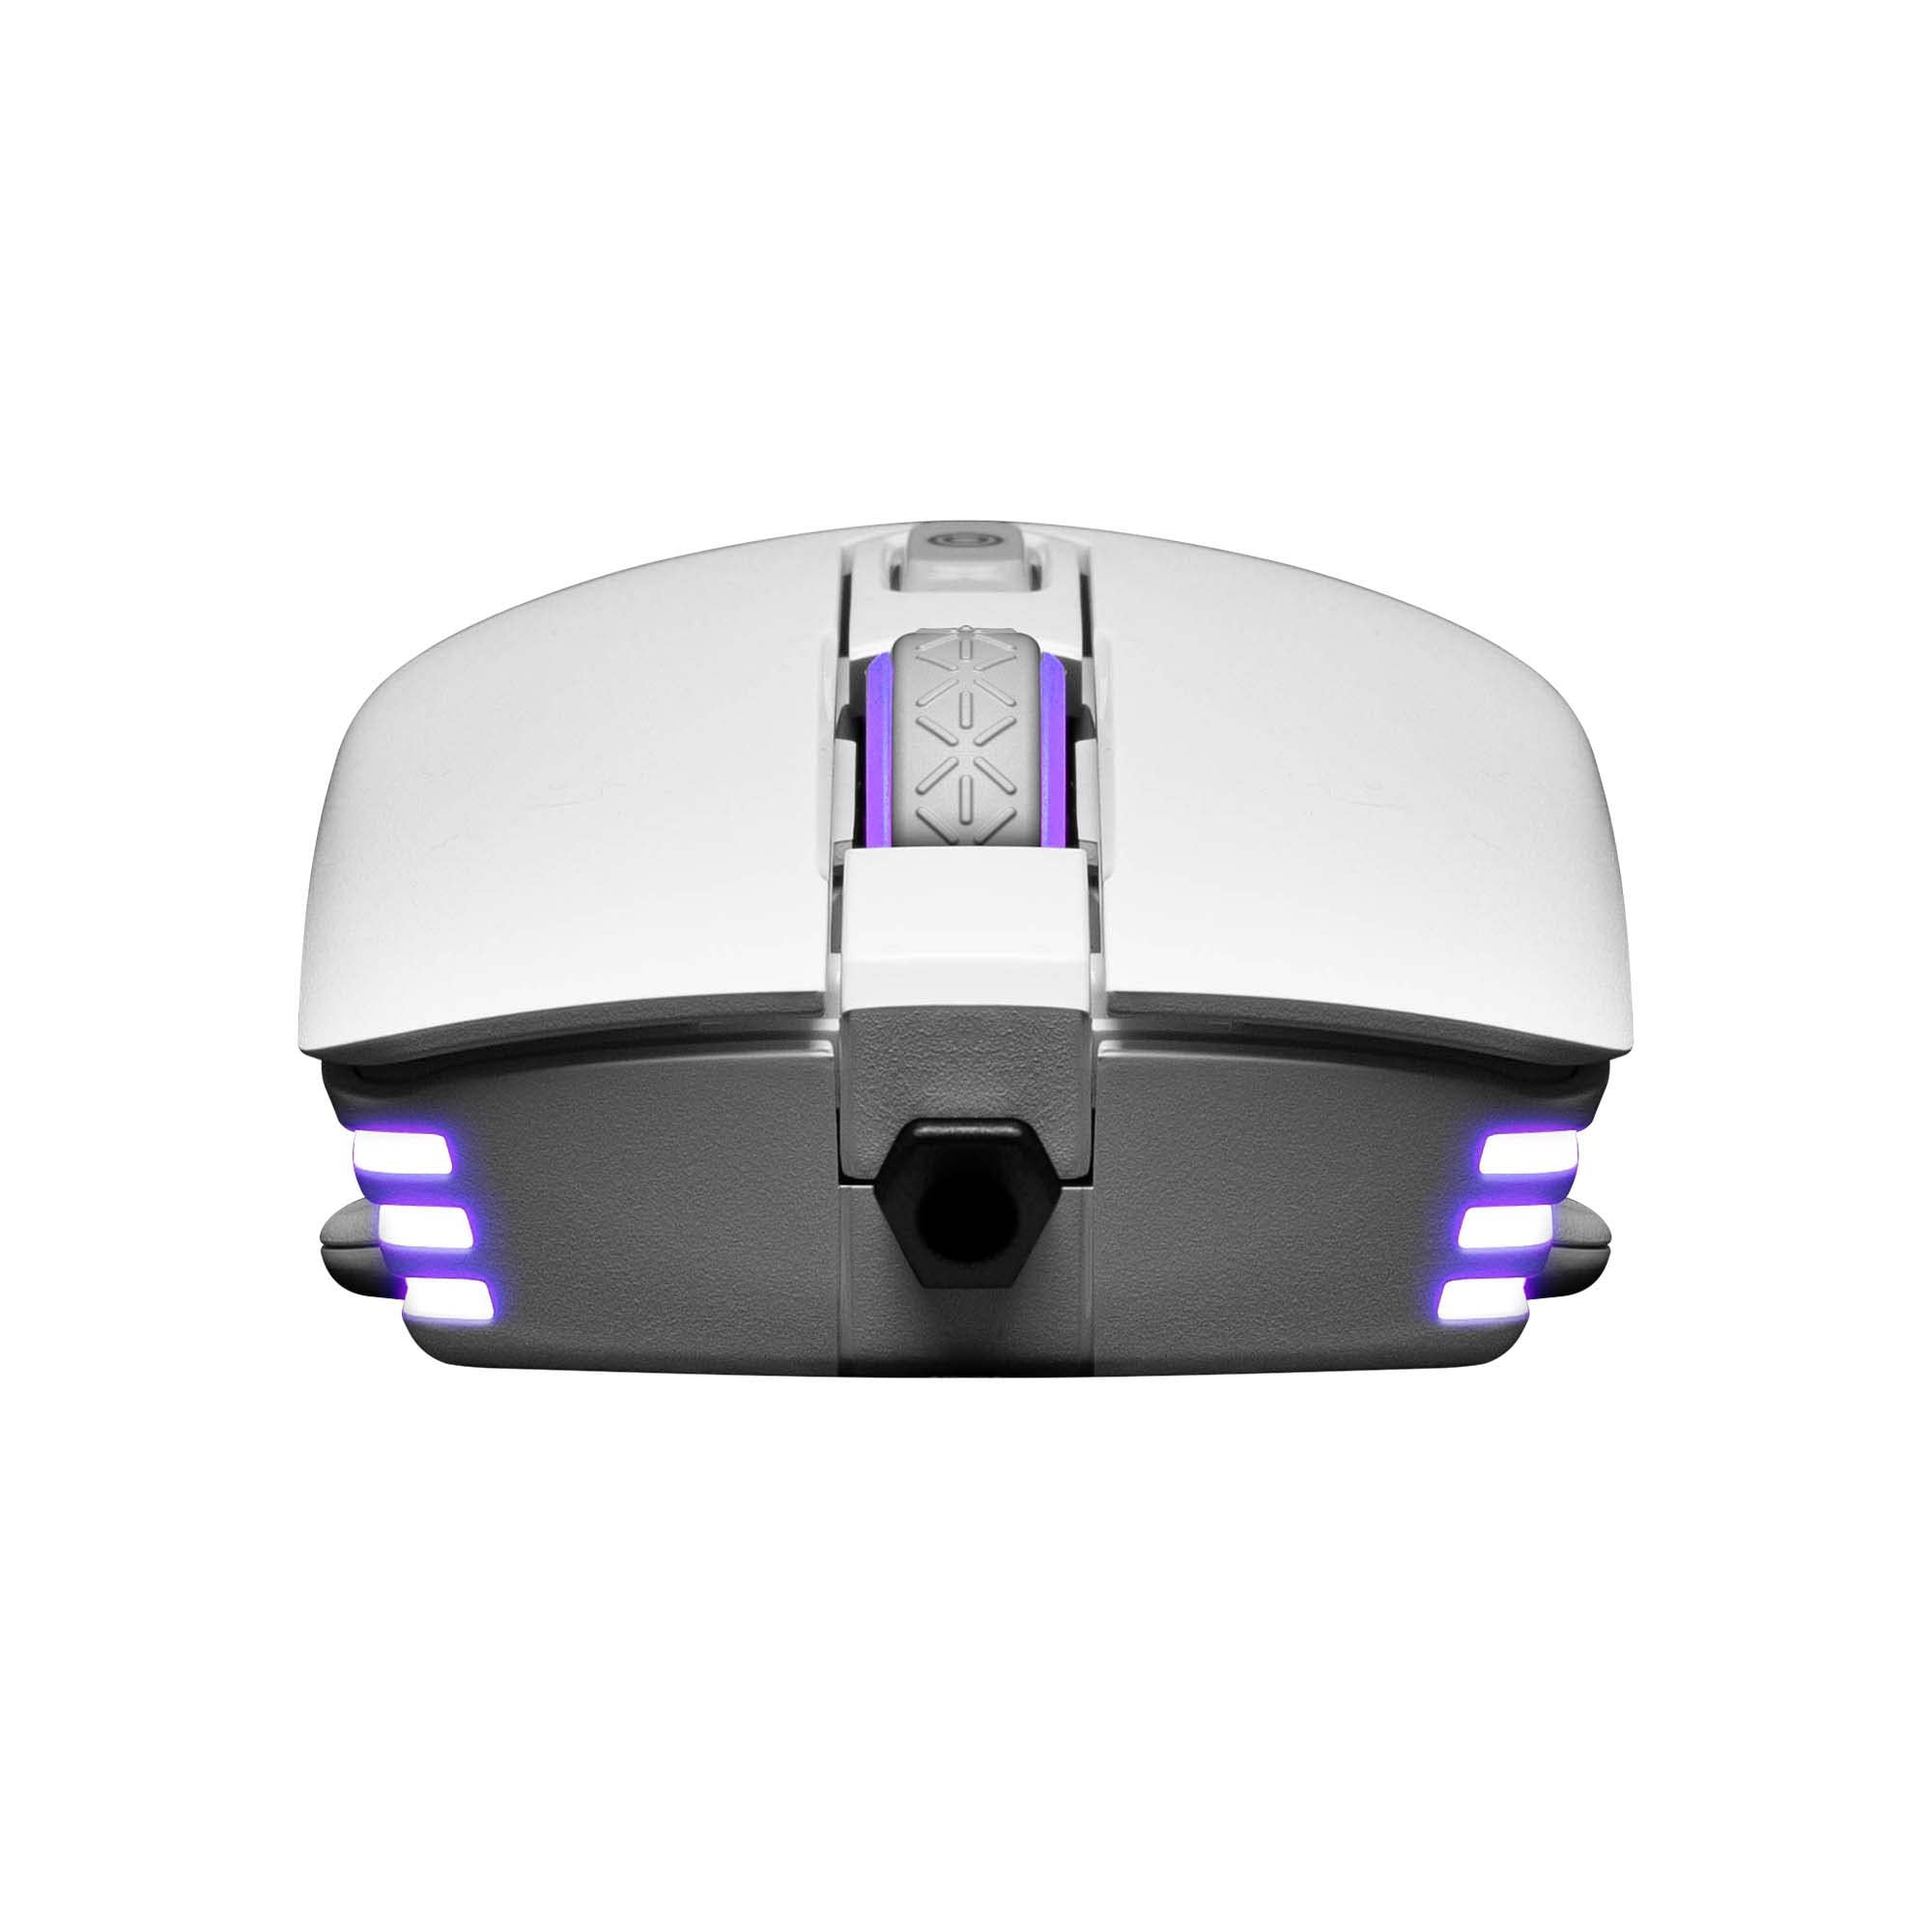 EVGA X12 Gaming Mouse, 8k, Wired, White, Customizable, Dual Sensor, 16,000 DPI, 5 Profiles, 8 Buttons, Ambidextrous Light Weight, RGB, 905-W1-12WH-KR